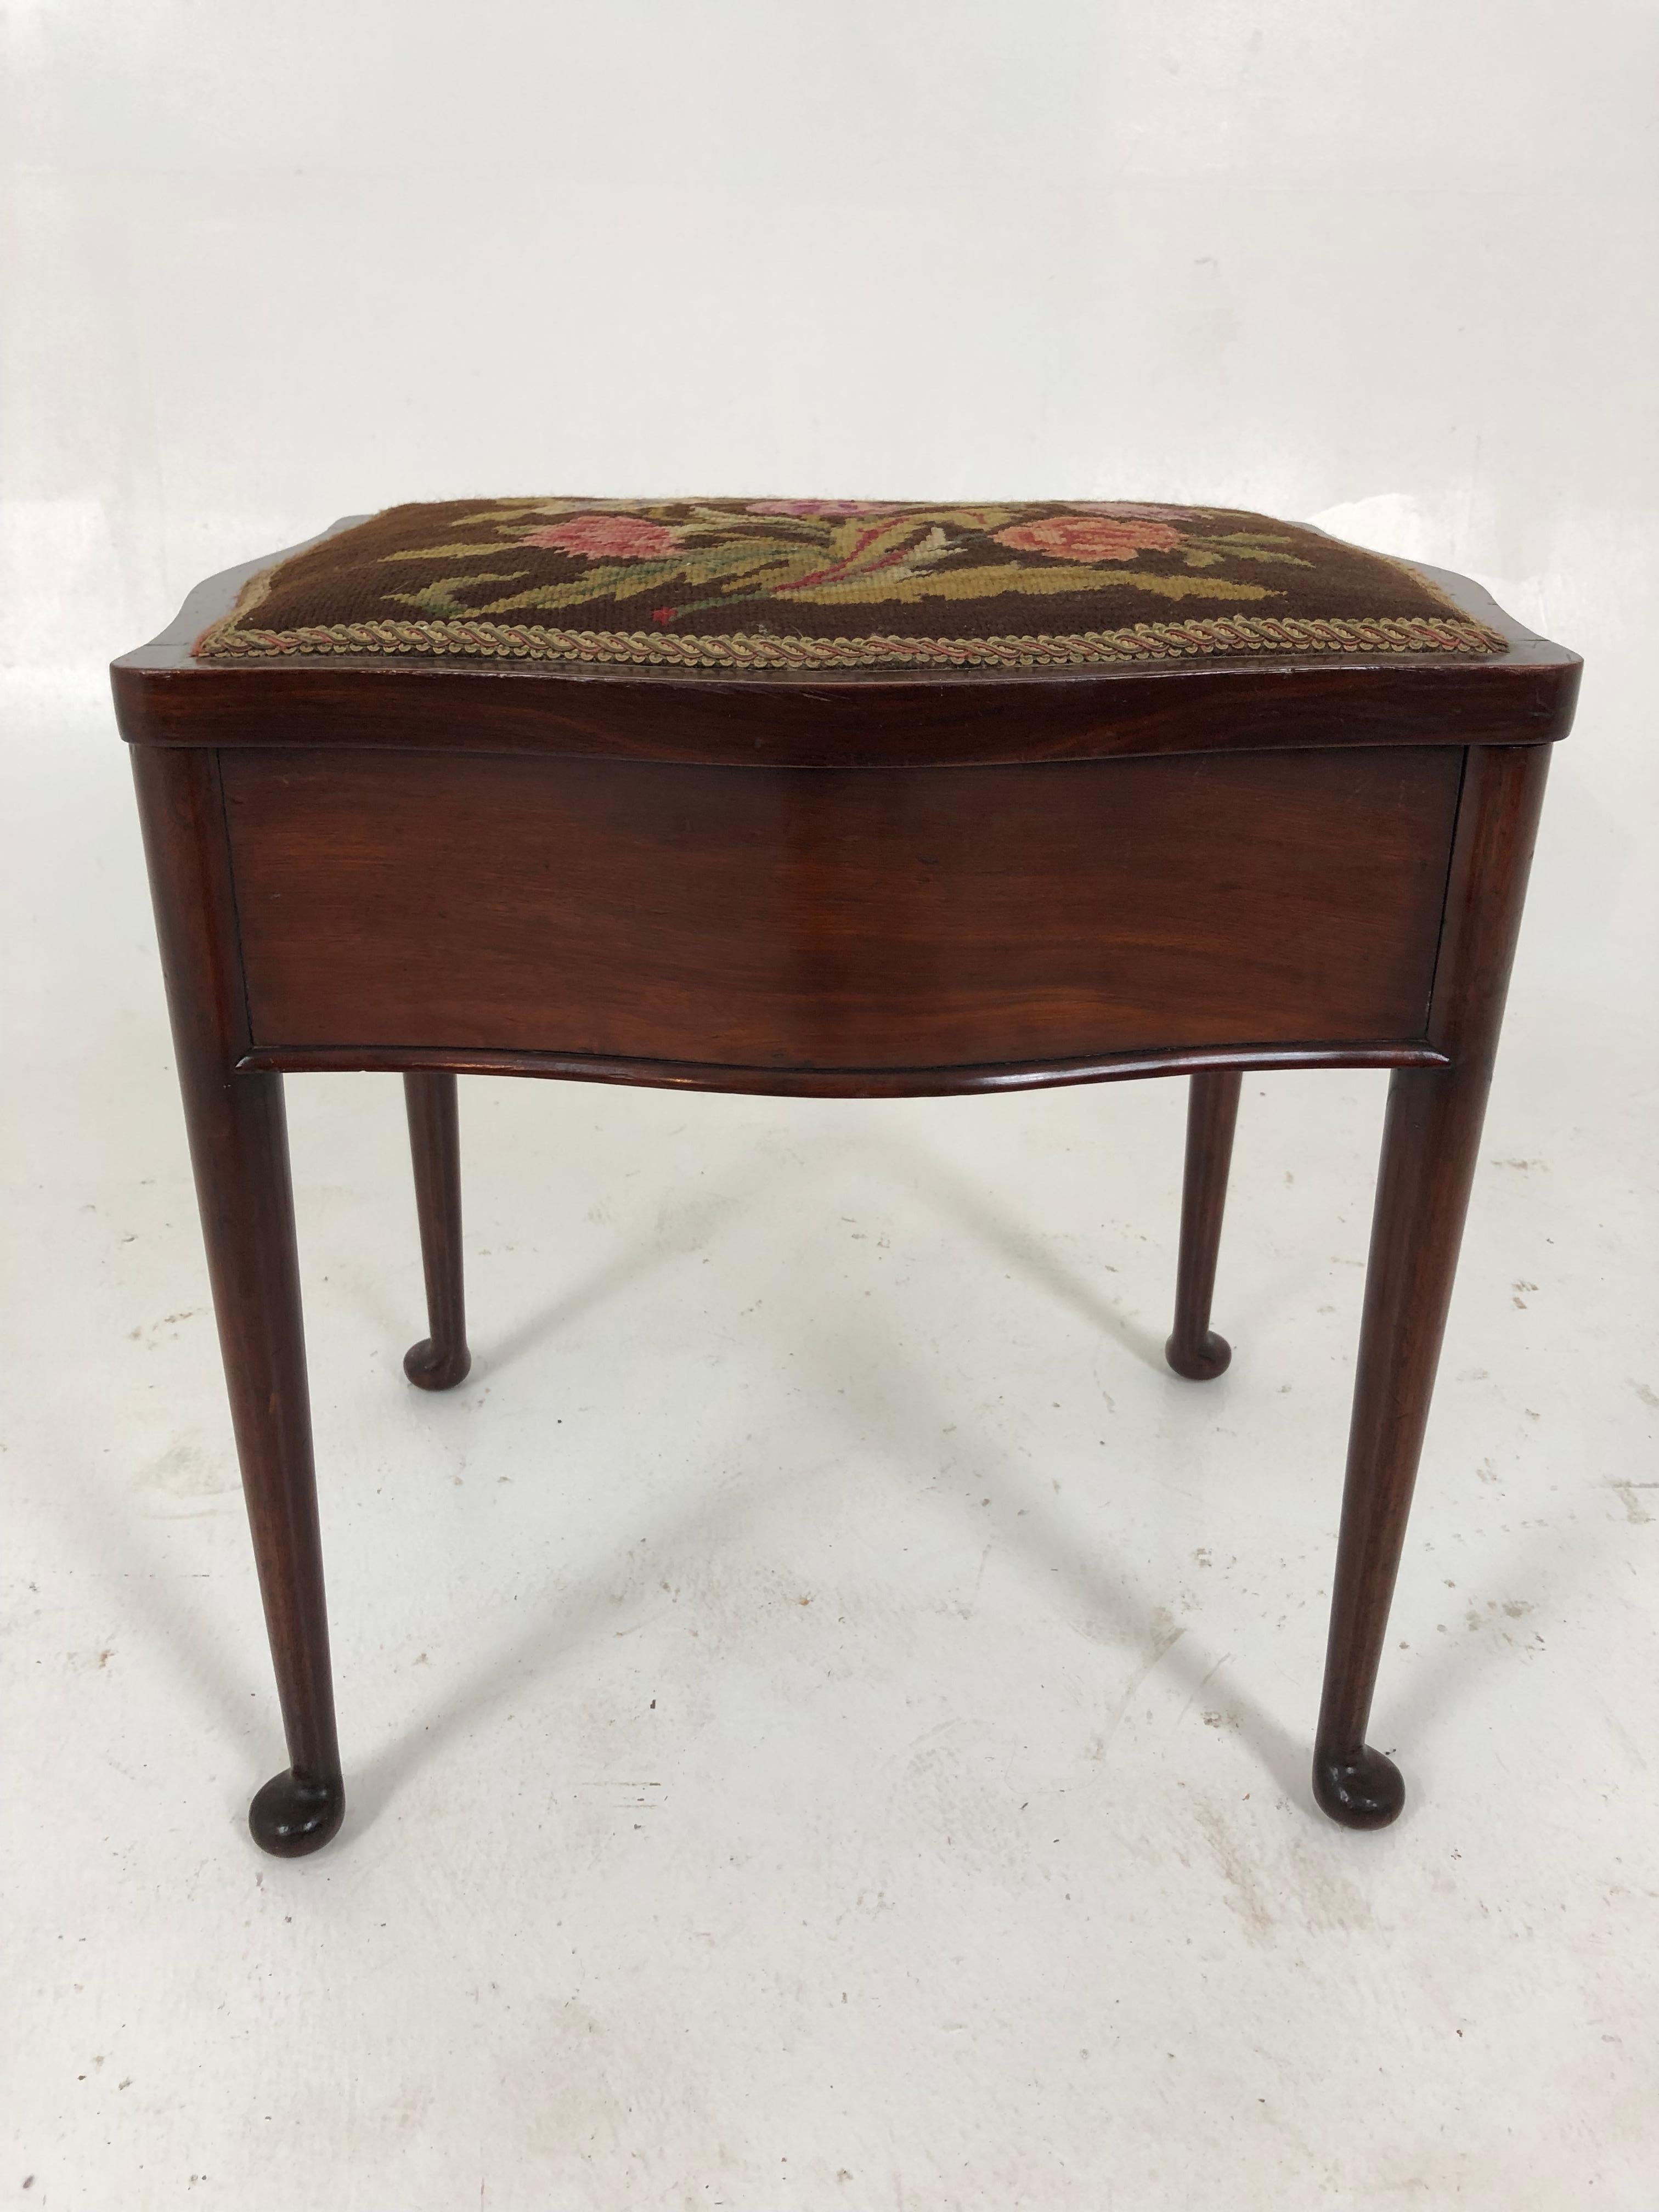 Antique Edwardian walnut piano stool, bench, Scotland 1920, H796

Scotland 1920
Solid walnut 
Original finish
Upholstered seat
The stool has a lift up padded seat with a needle point covering 
Finished on all sides
All supported by cabriole style